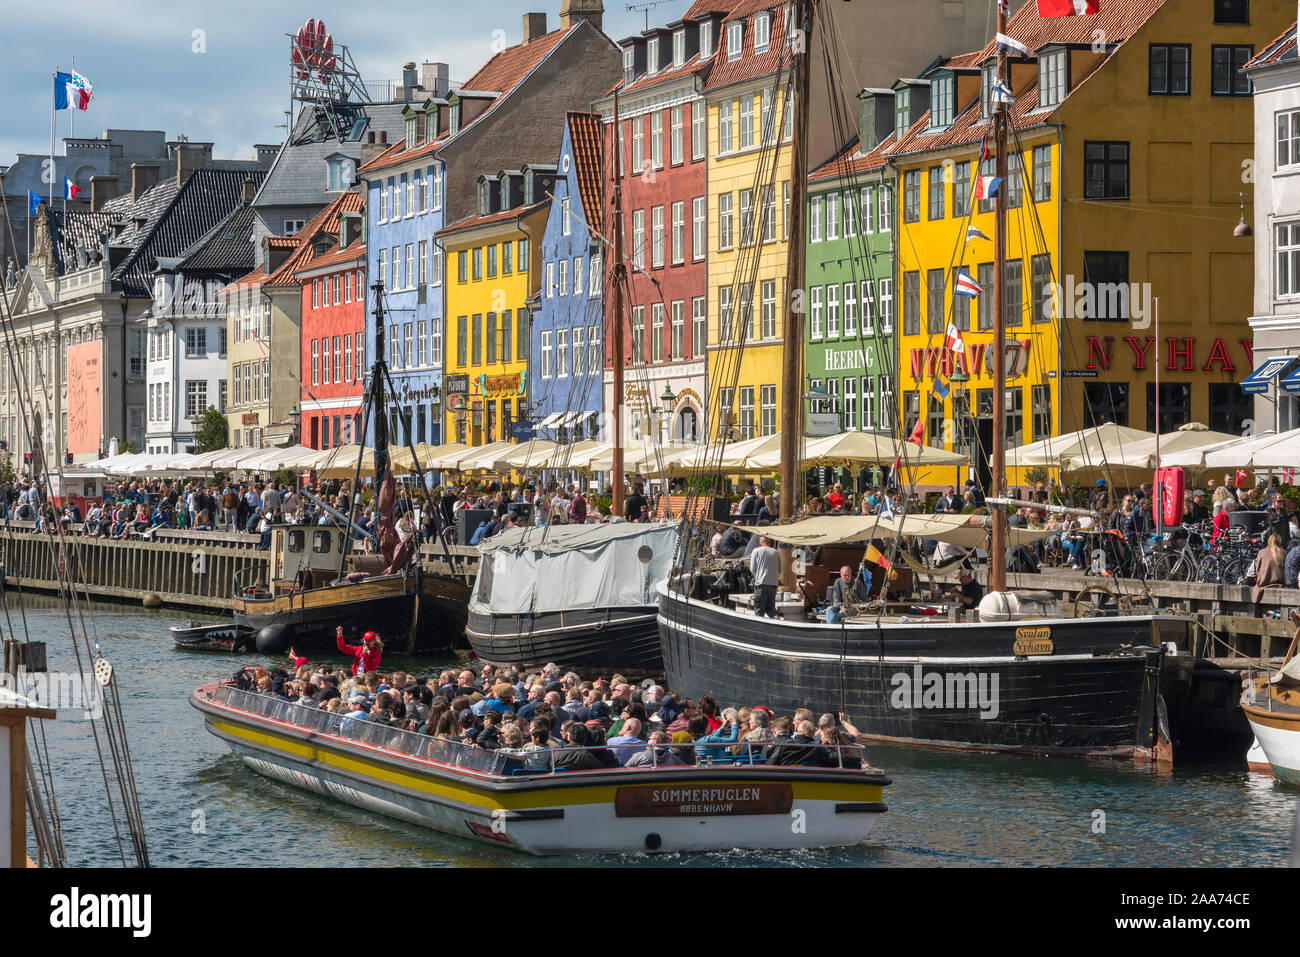 Nyhavn Copenhagen, view in summer of the popular Nyhavn waterfront area with a group of tourists on a boat tour of the Copenhagen canals, Denmark. Stock Photo